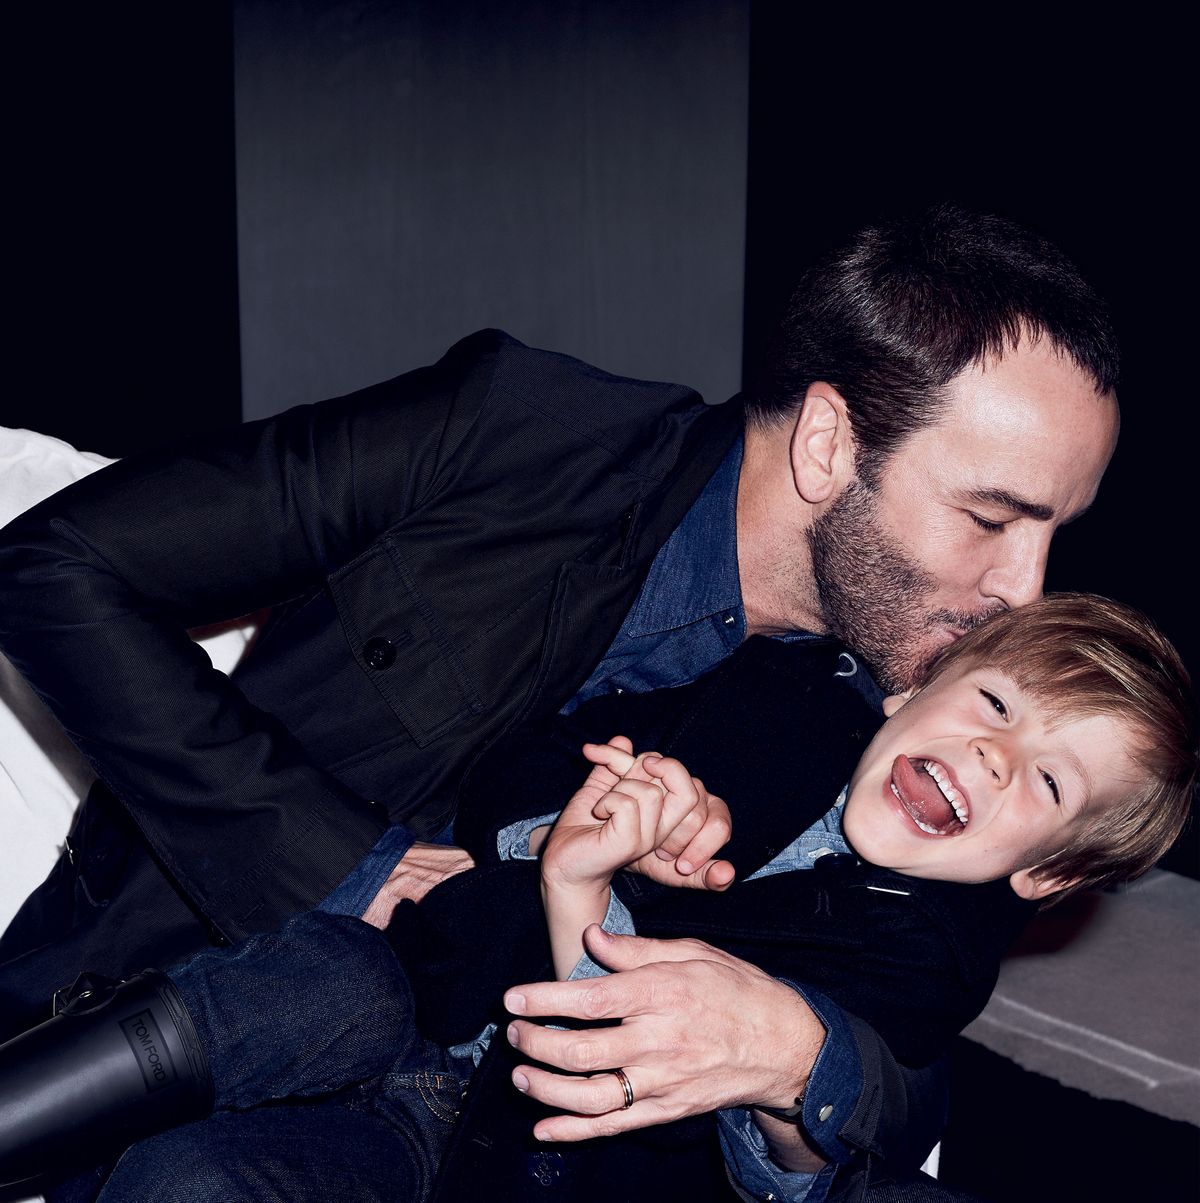 How Tom Ford's relationship with the love of his life Richard